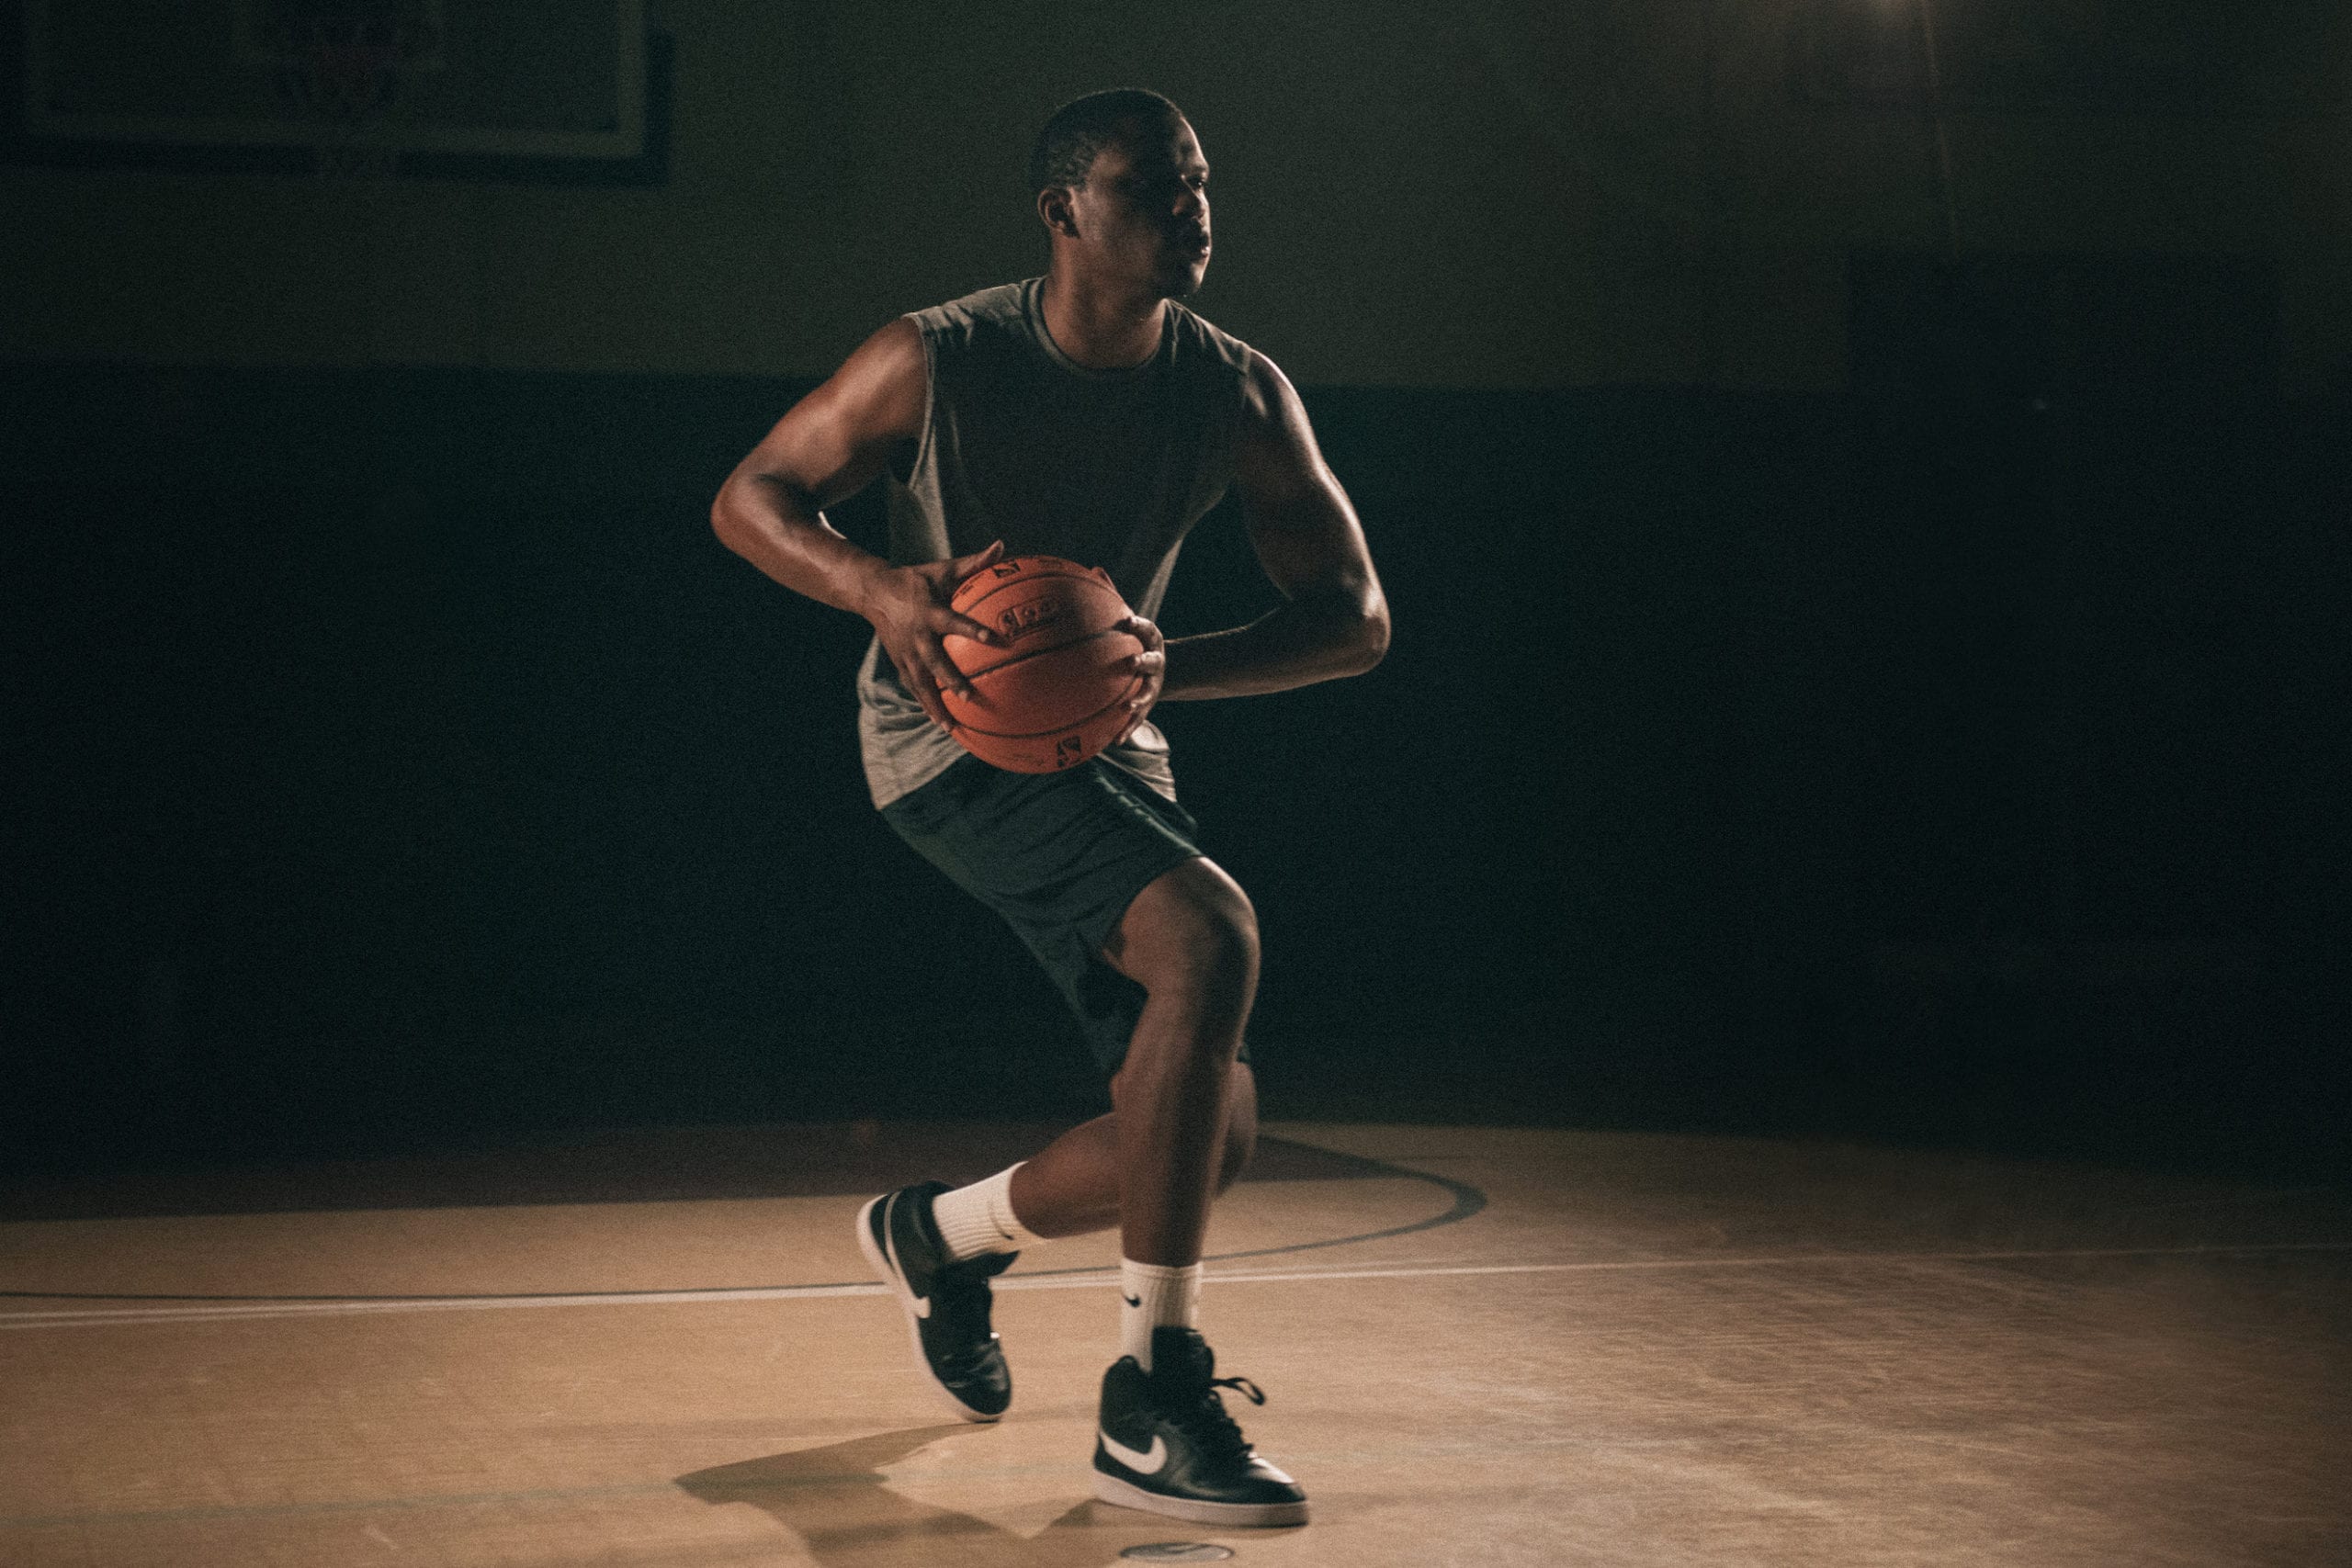 Creative Marketing Concept for Nike Sneakers An African American man poised holding a basketball on a basketball court with a light shining on him in semi darkness